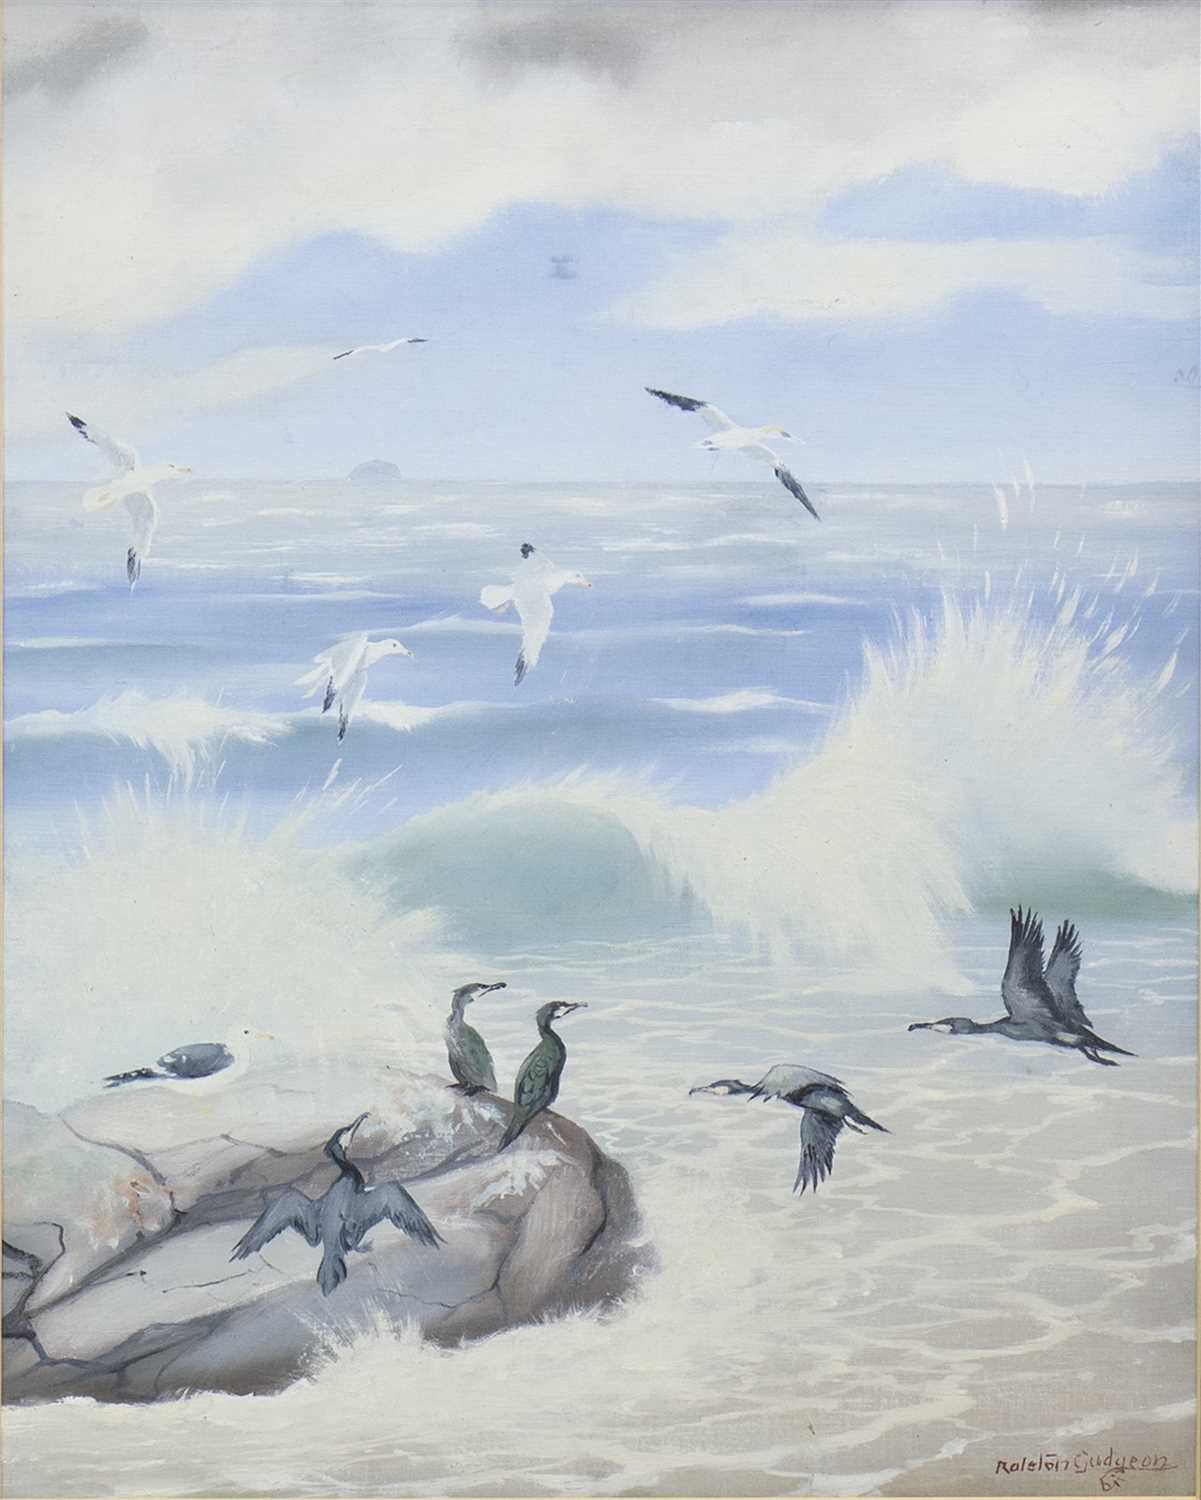 Lot 406 - CORMORANTS AND SEAGULLS, AN OIL BY RALSTON GUDGEON